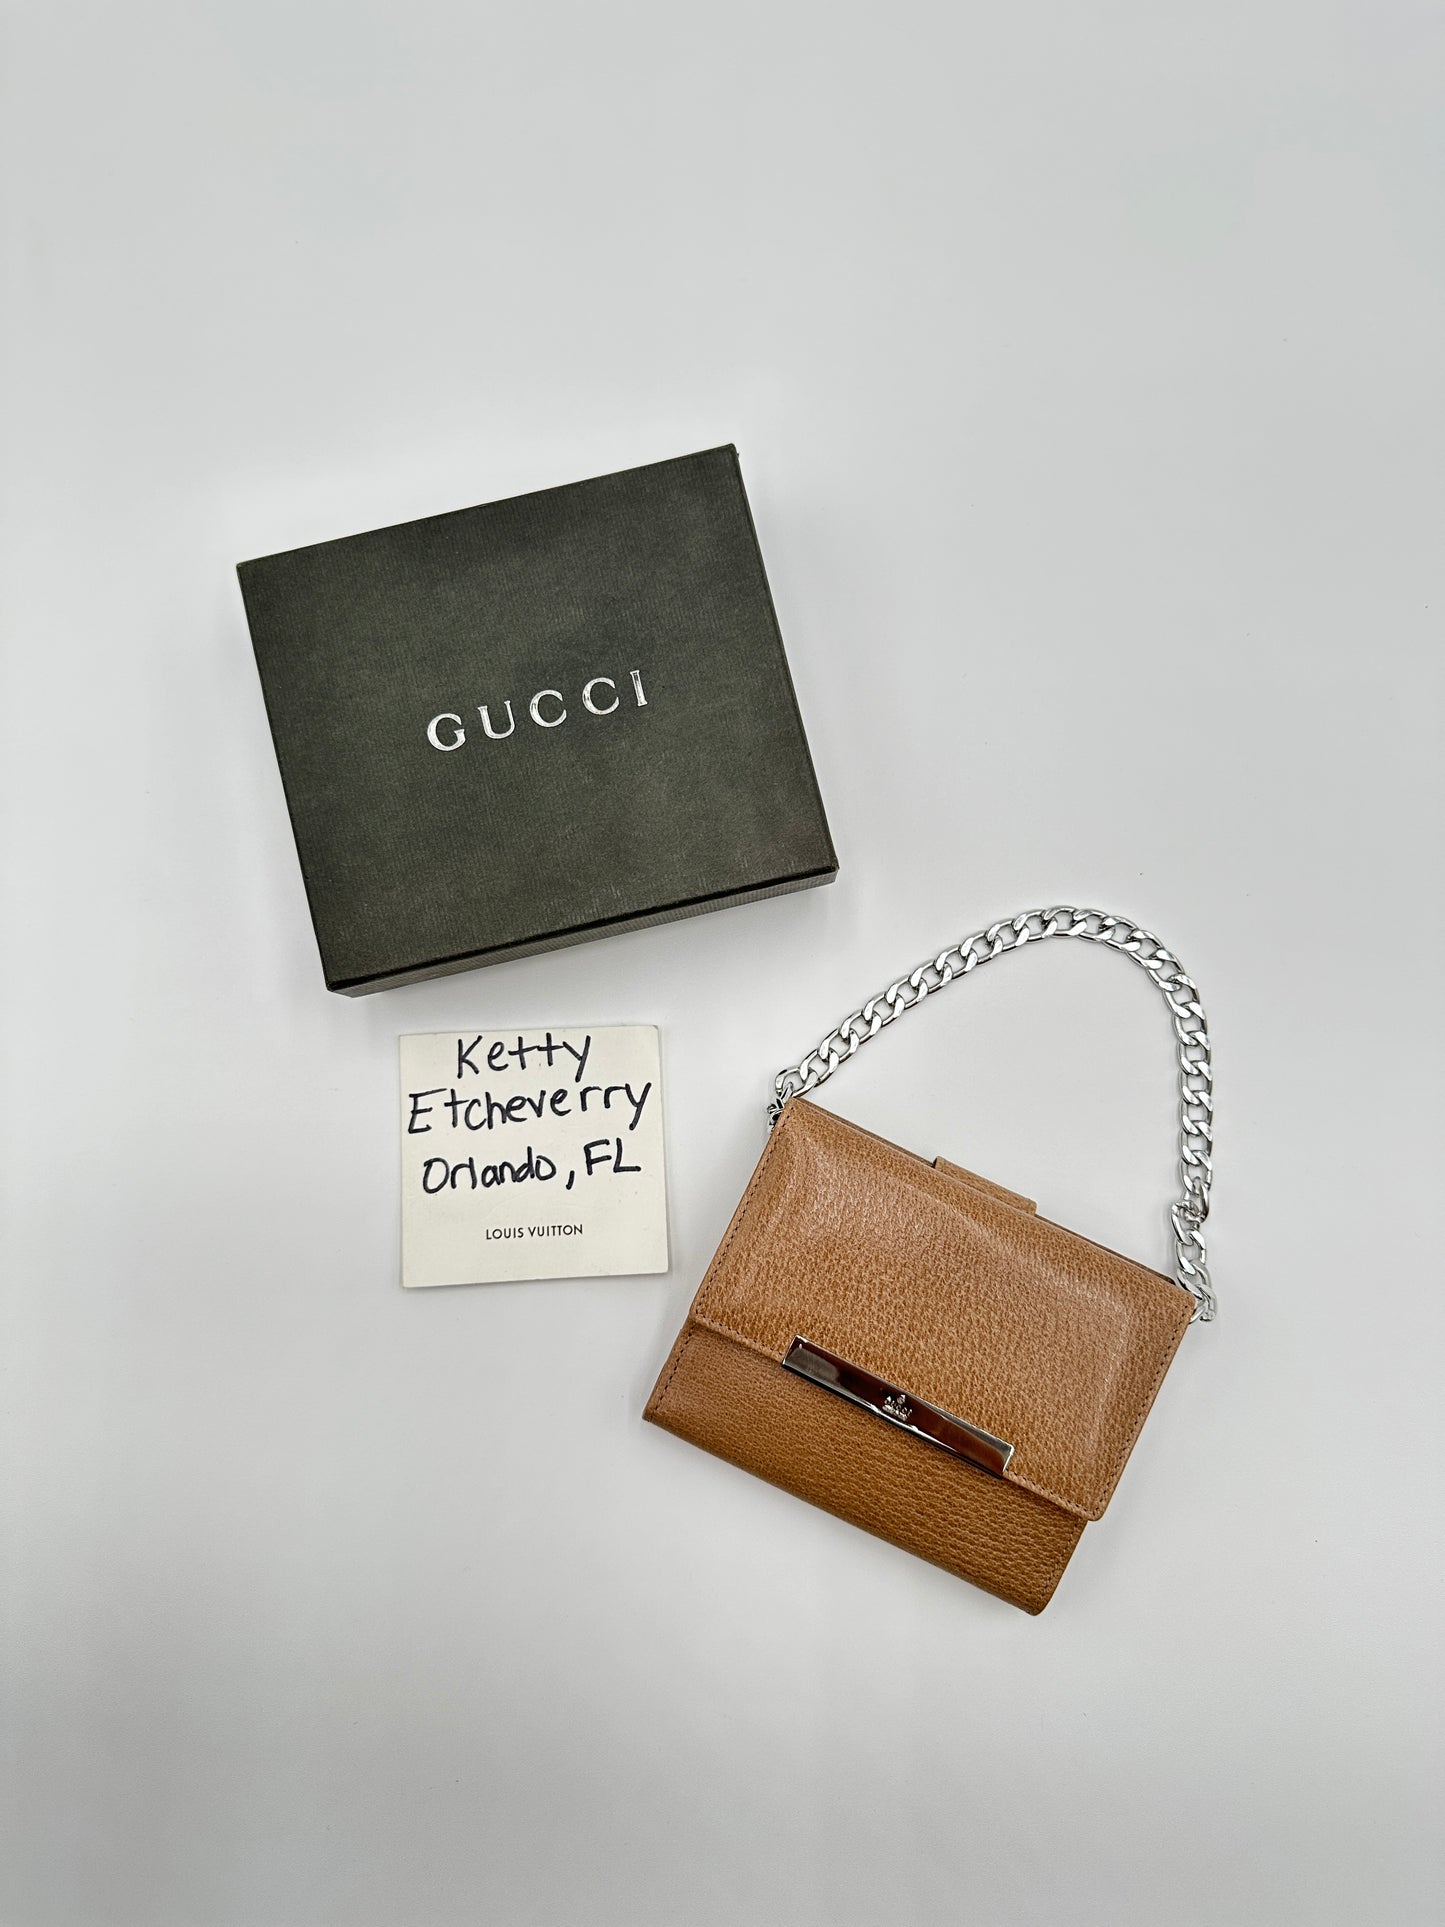 Authentic Gucci Beige Compact Bifold Wallet w/ Box